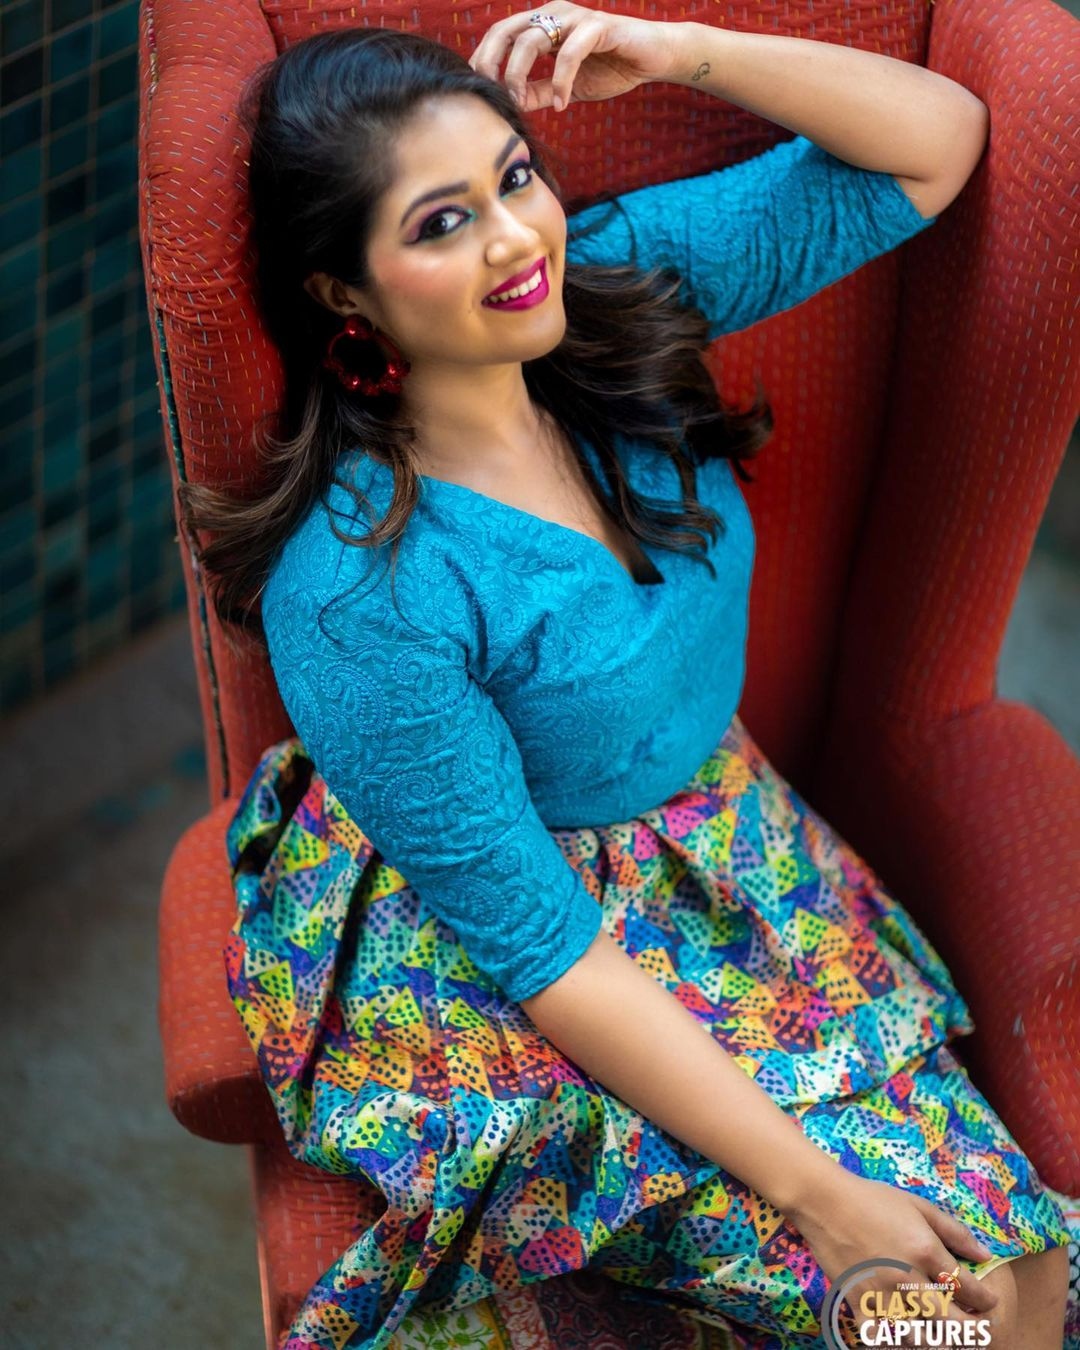 Actress Meghana Raj Sex 3gp - Actress Meghana Raj returns to shooting after a year and shares images from  the spot! - Tamil News - IndiaGlitz.com